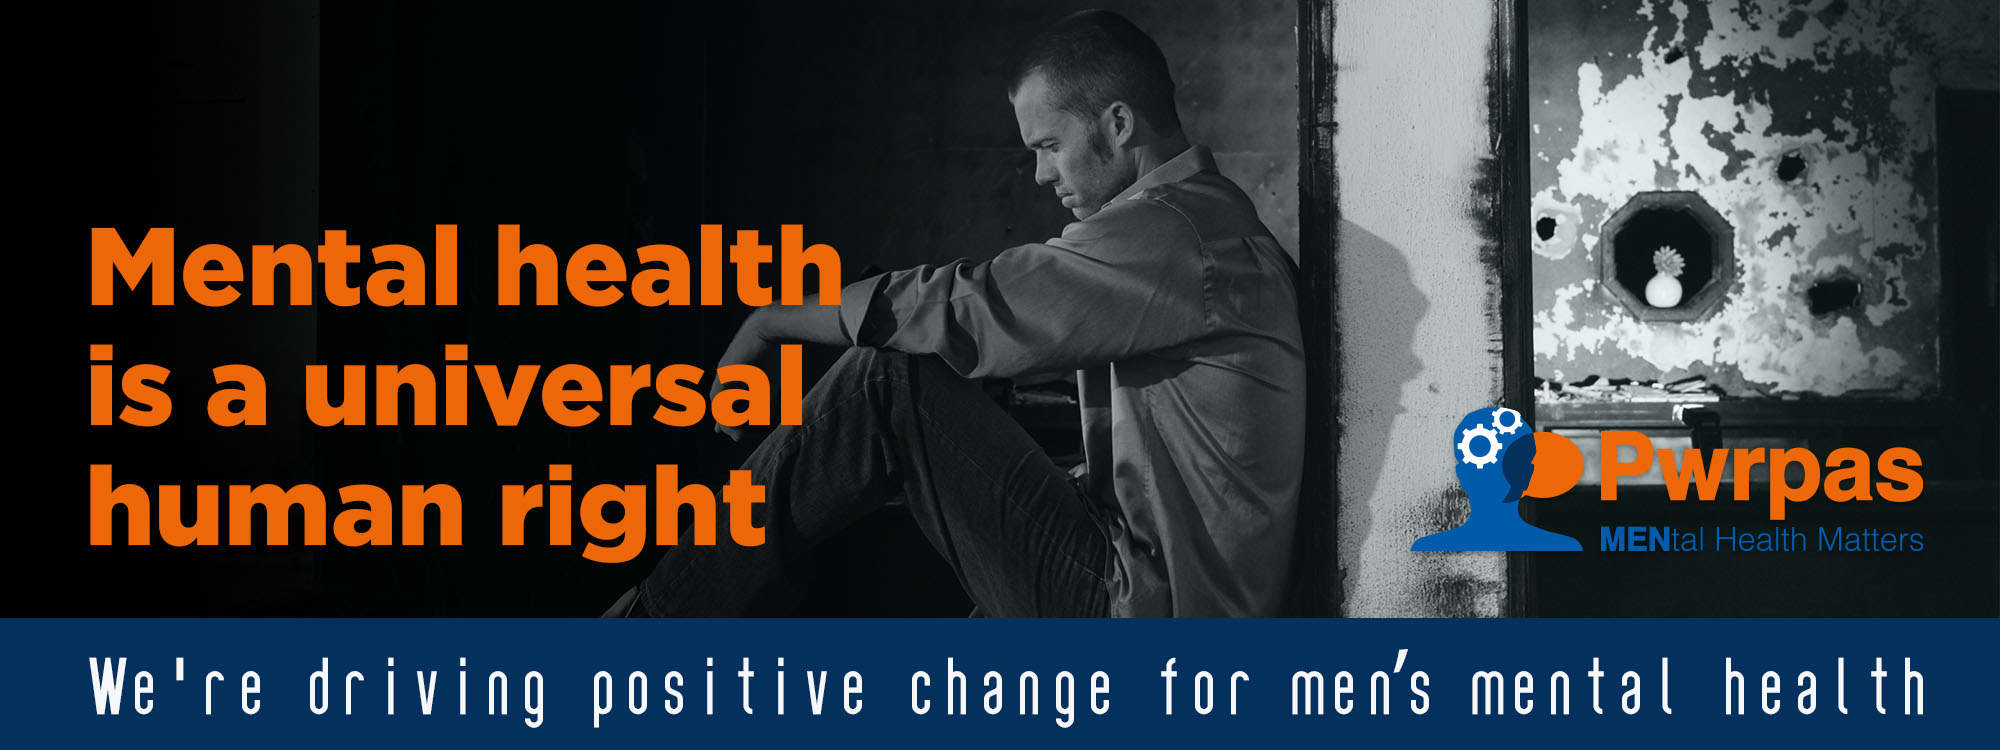 mental health is a universal human right